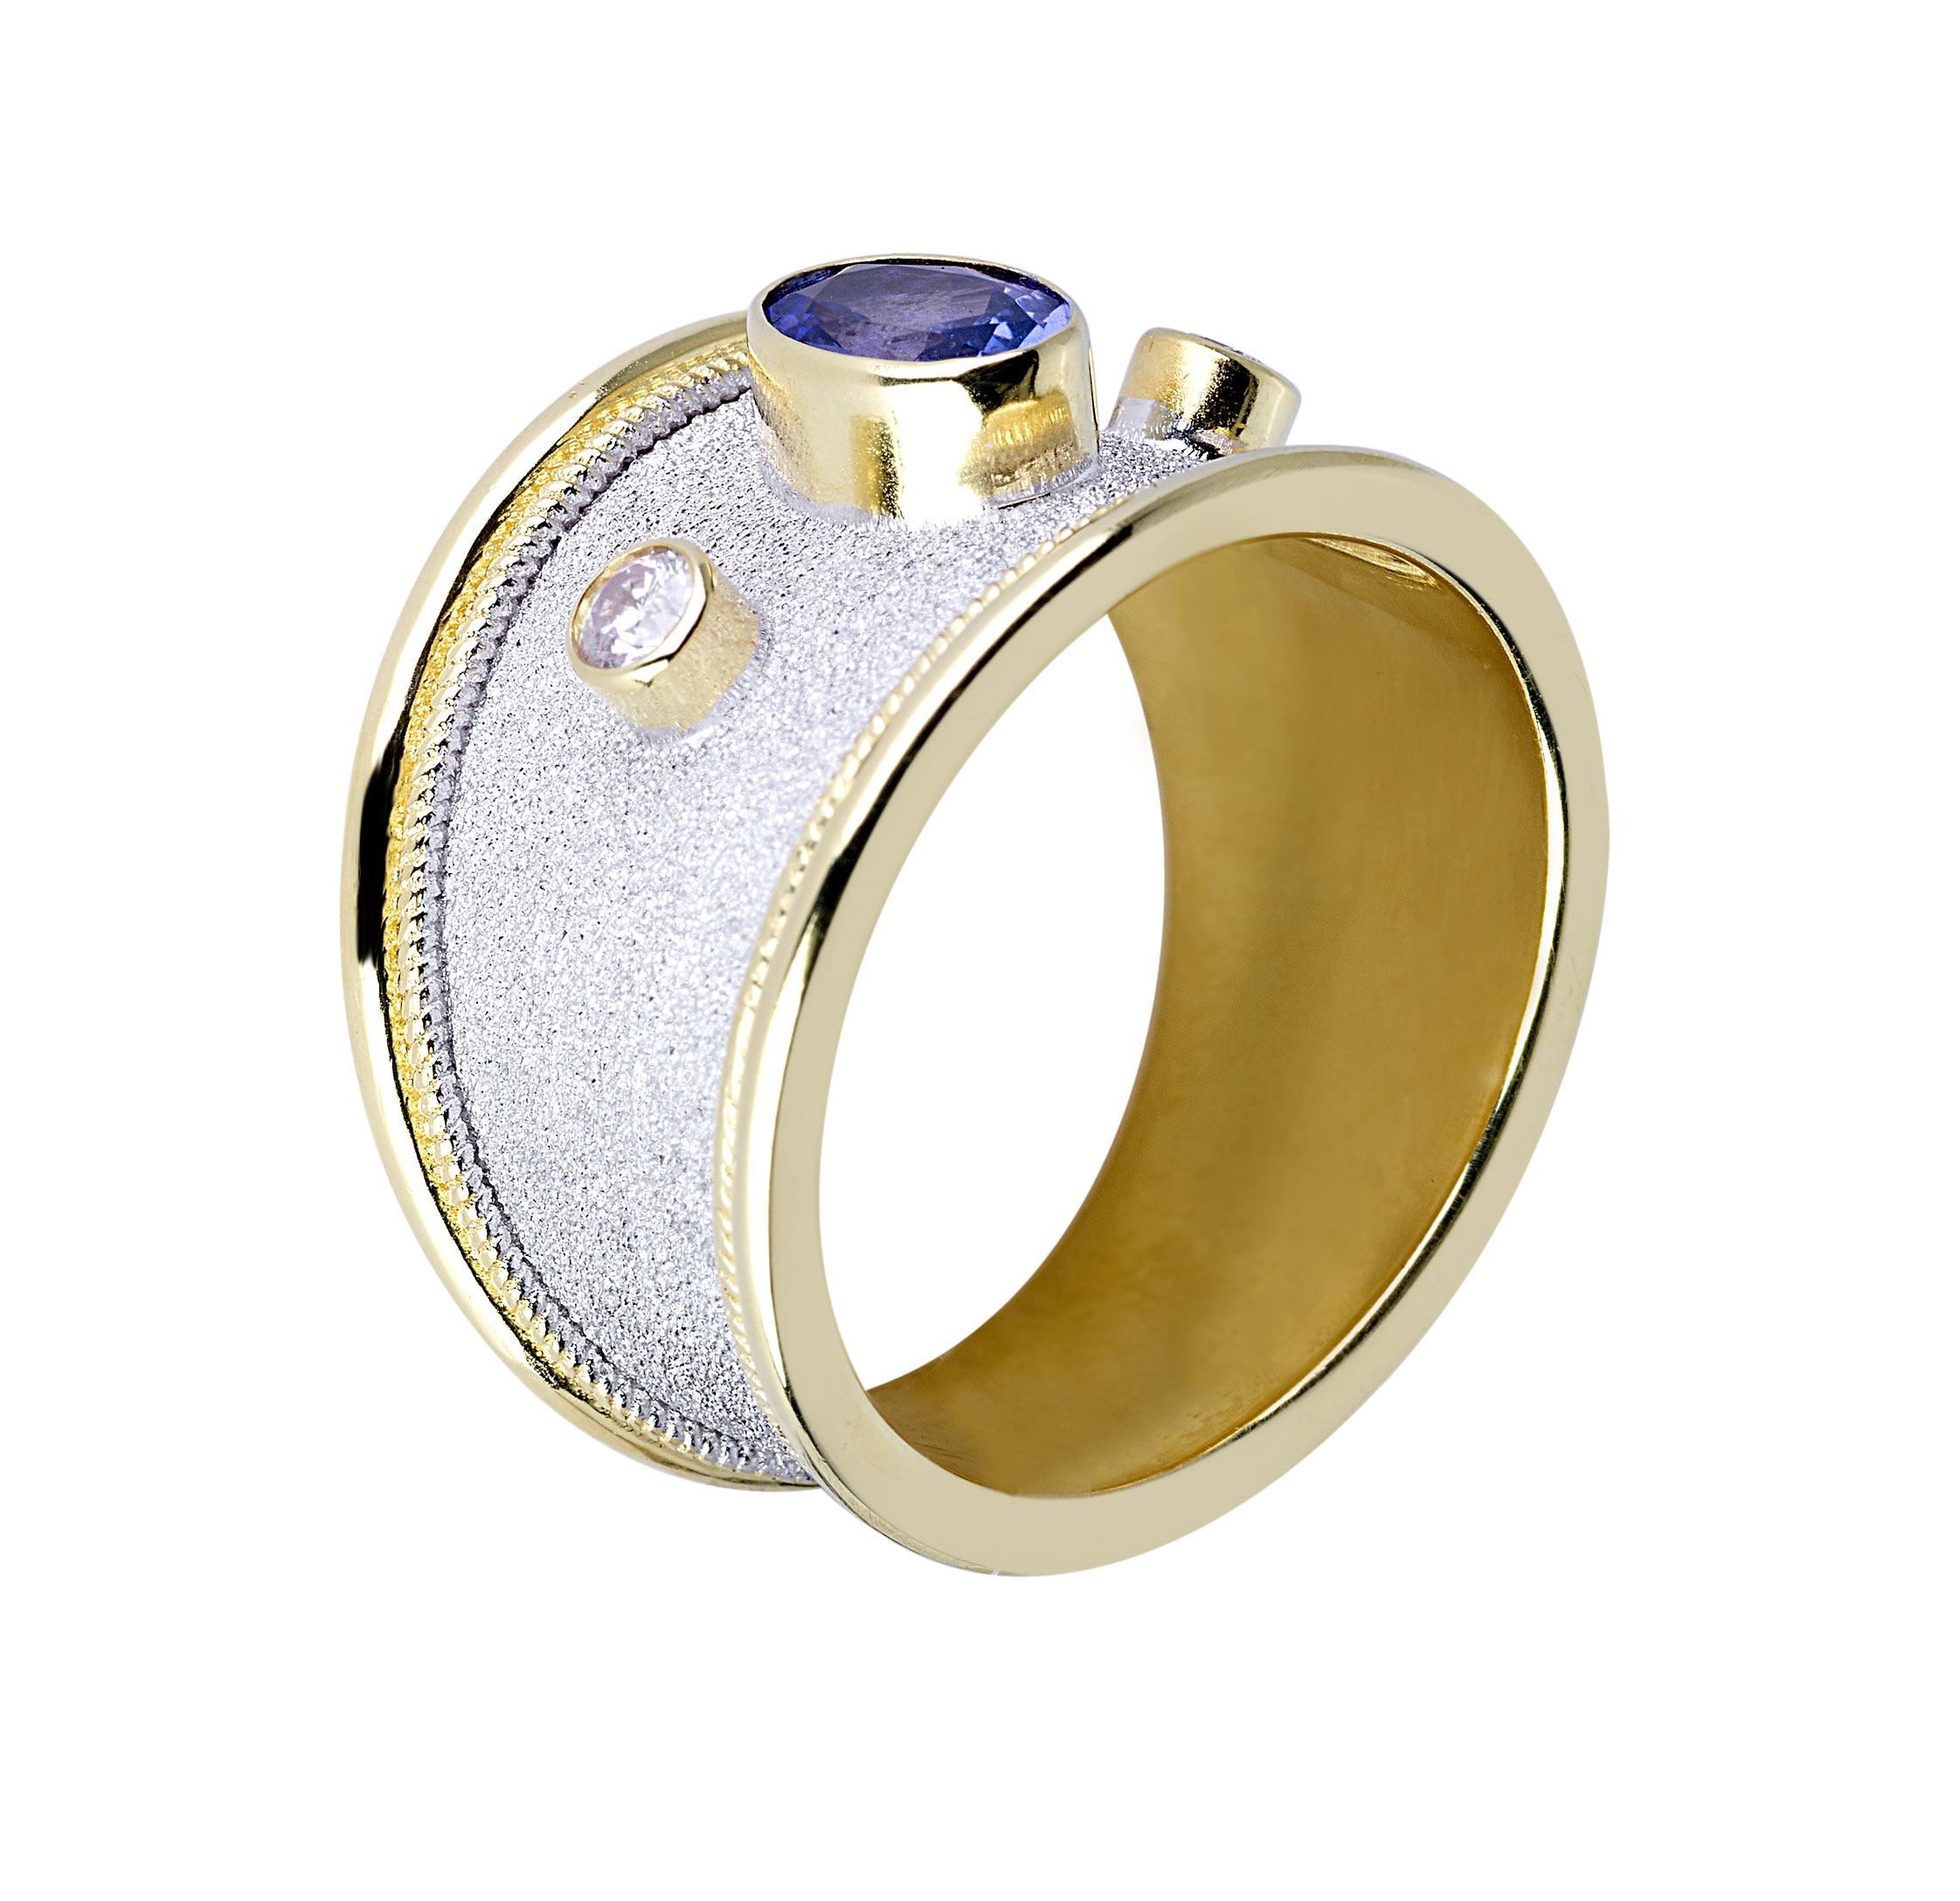 S.Georgios designer ring is all handmade from solid 18 Karat Yellow Gold and custom-made. The gorgeous ring features a Tanzanite and 2 Diamonds in contrast with a Byzantine velvet background finished in White Rhodium. The beautiful piece features 2